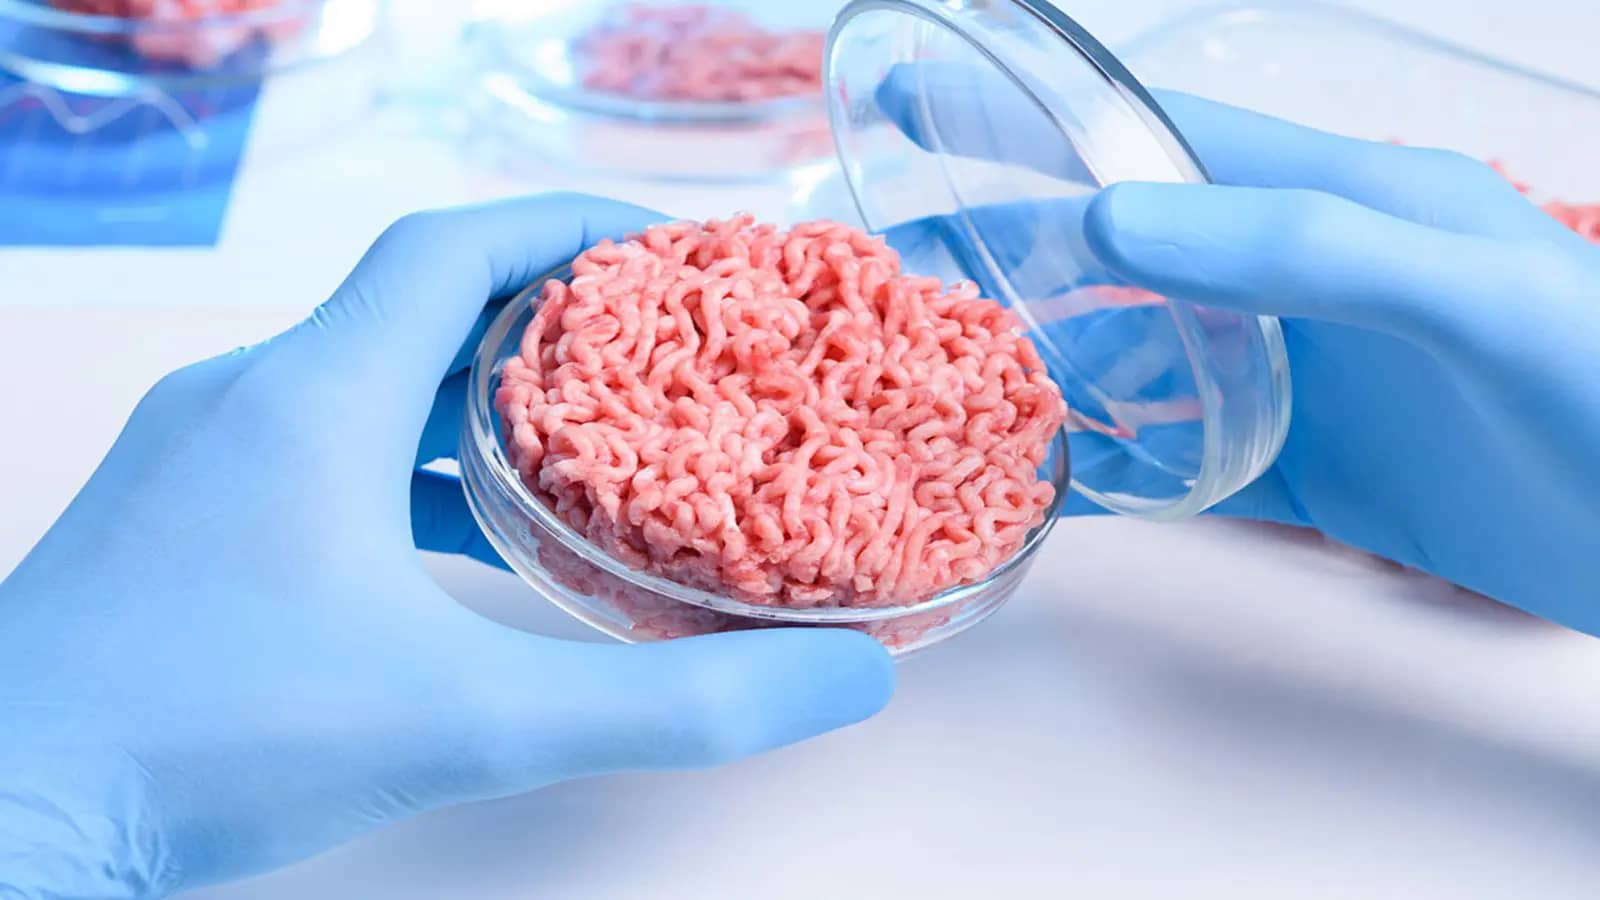 SuperMeat obtains grant from Israel Government to bolster capacity for cultivate meat ingredients